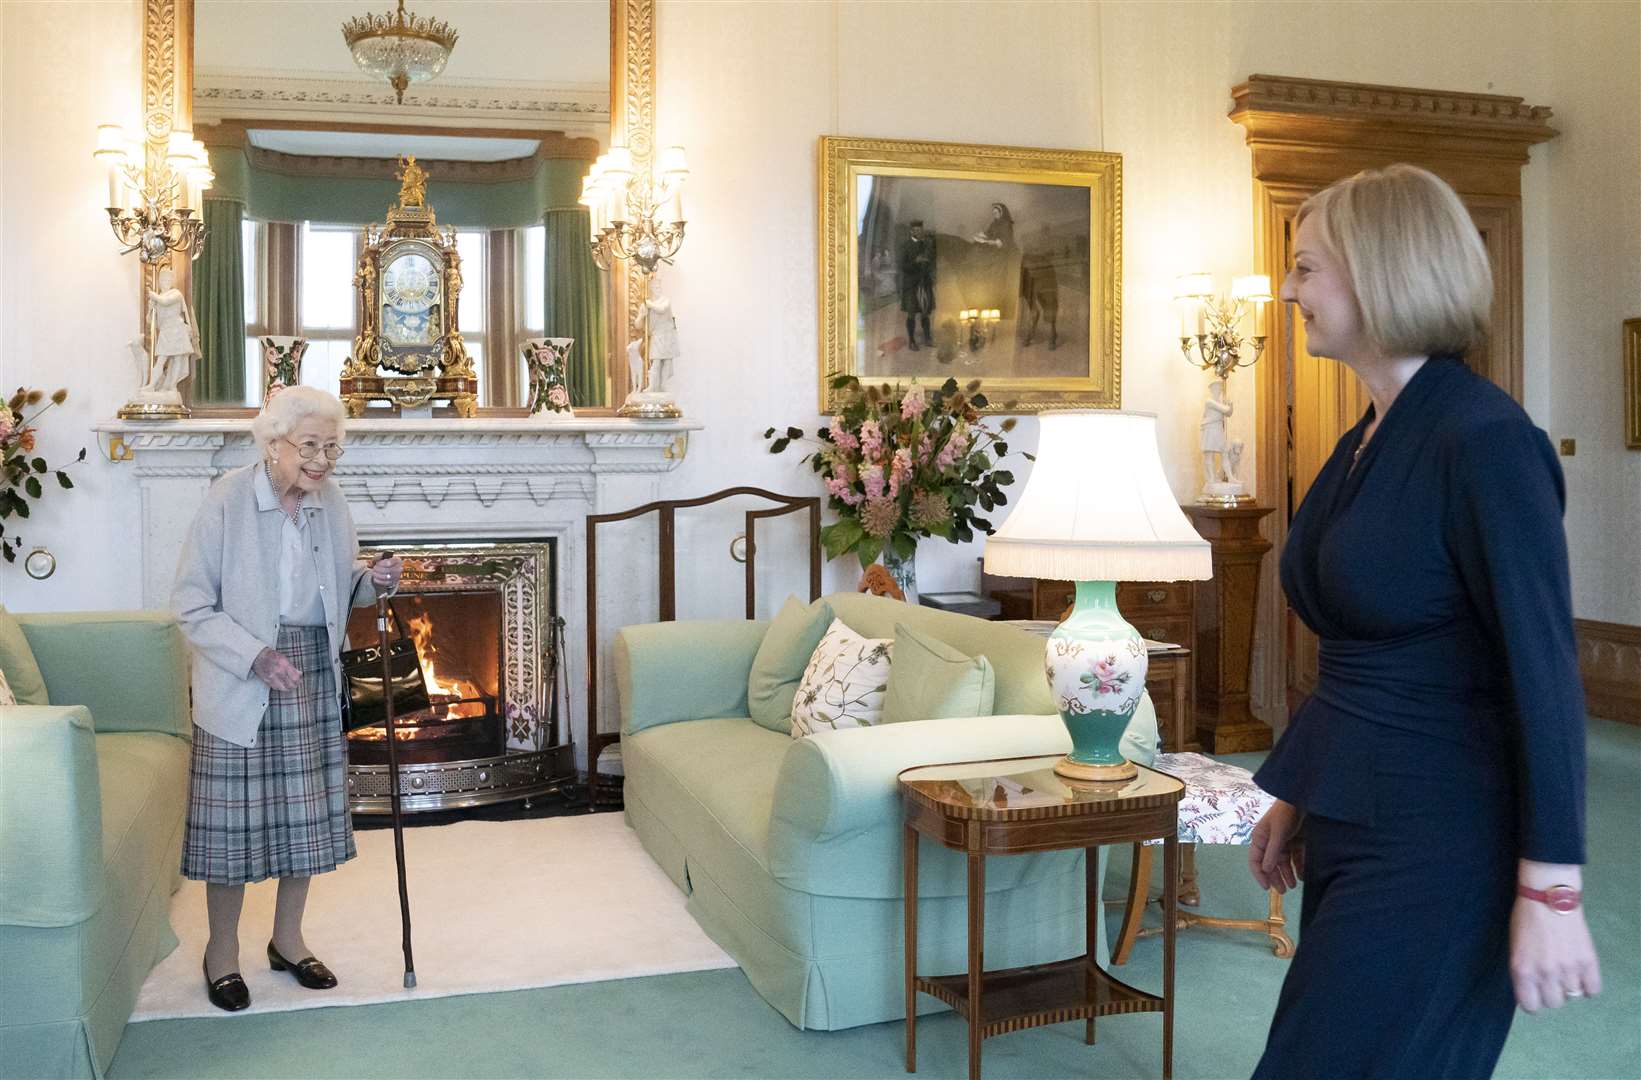 The Queen welcomes Liz Truss during an audience at Balmoral, where she invited the newly-elected leader of the Conservative Party to become prime minister and form a new government (Jane Barlow/PA)